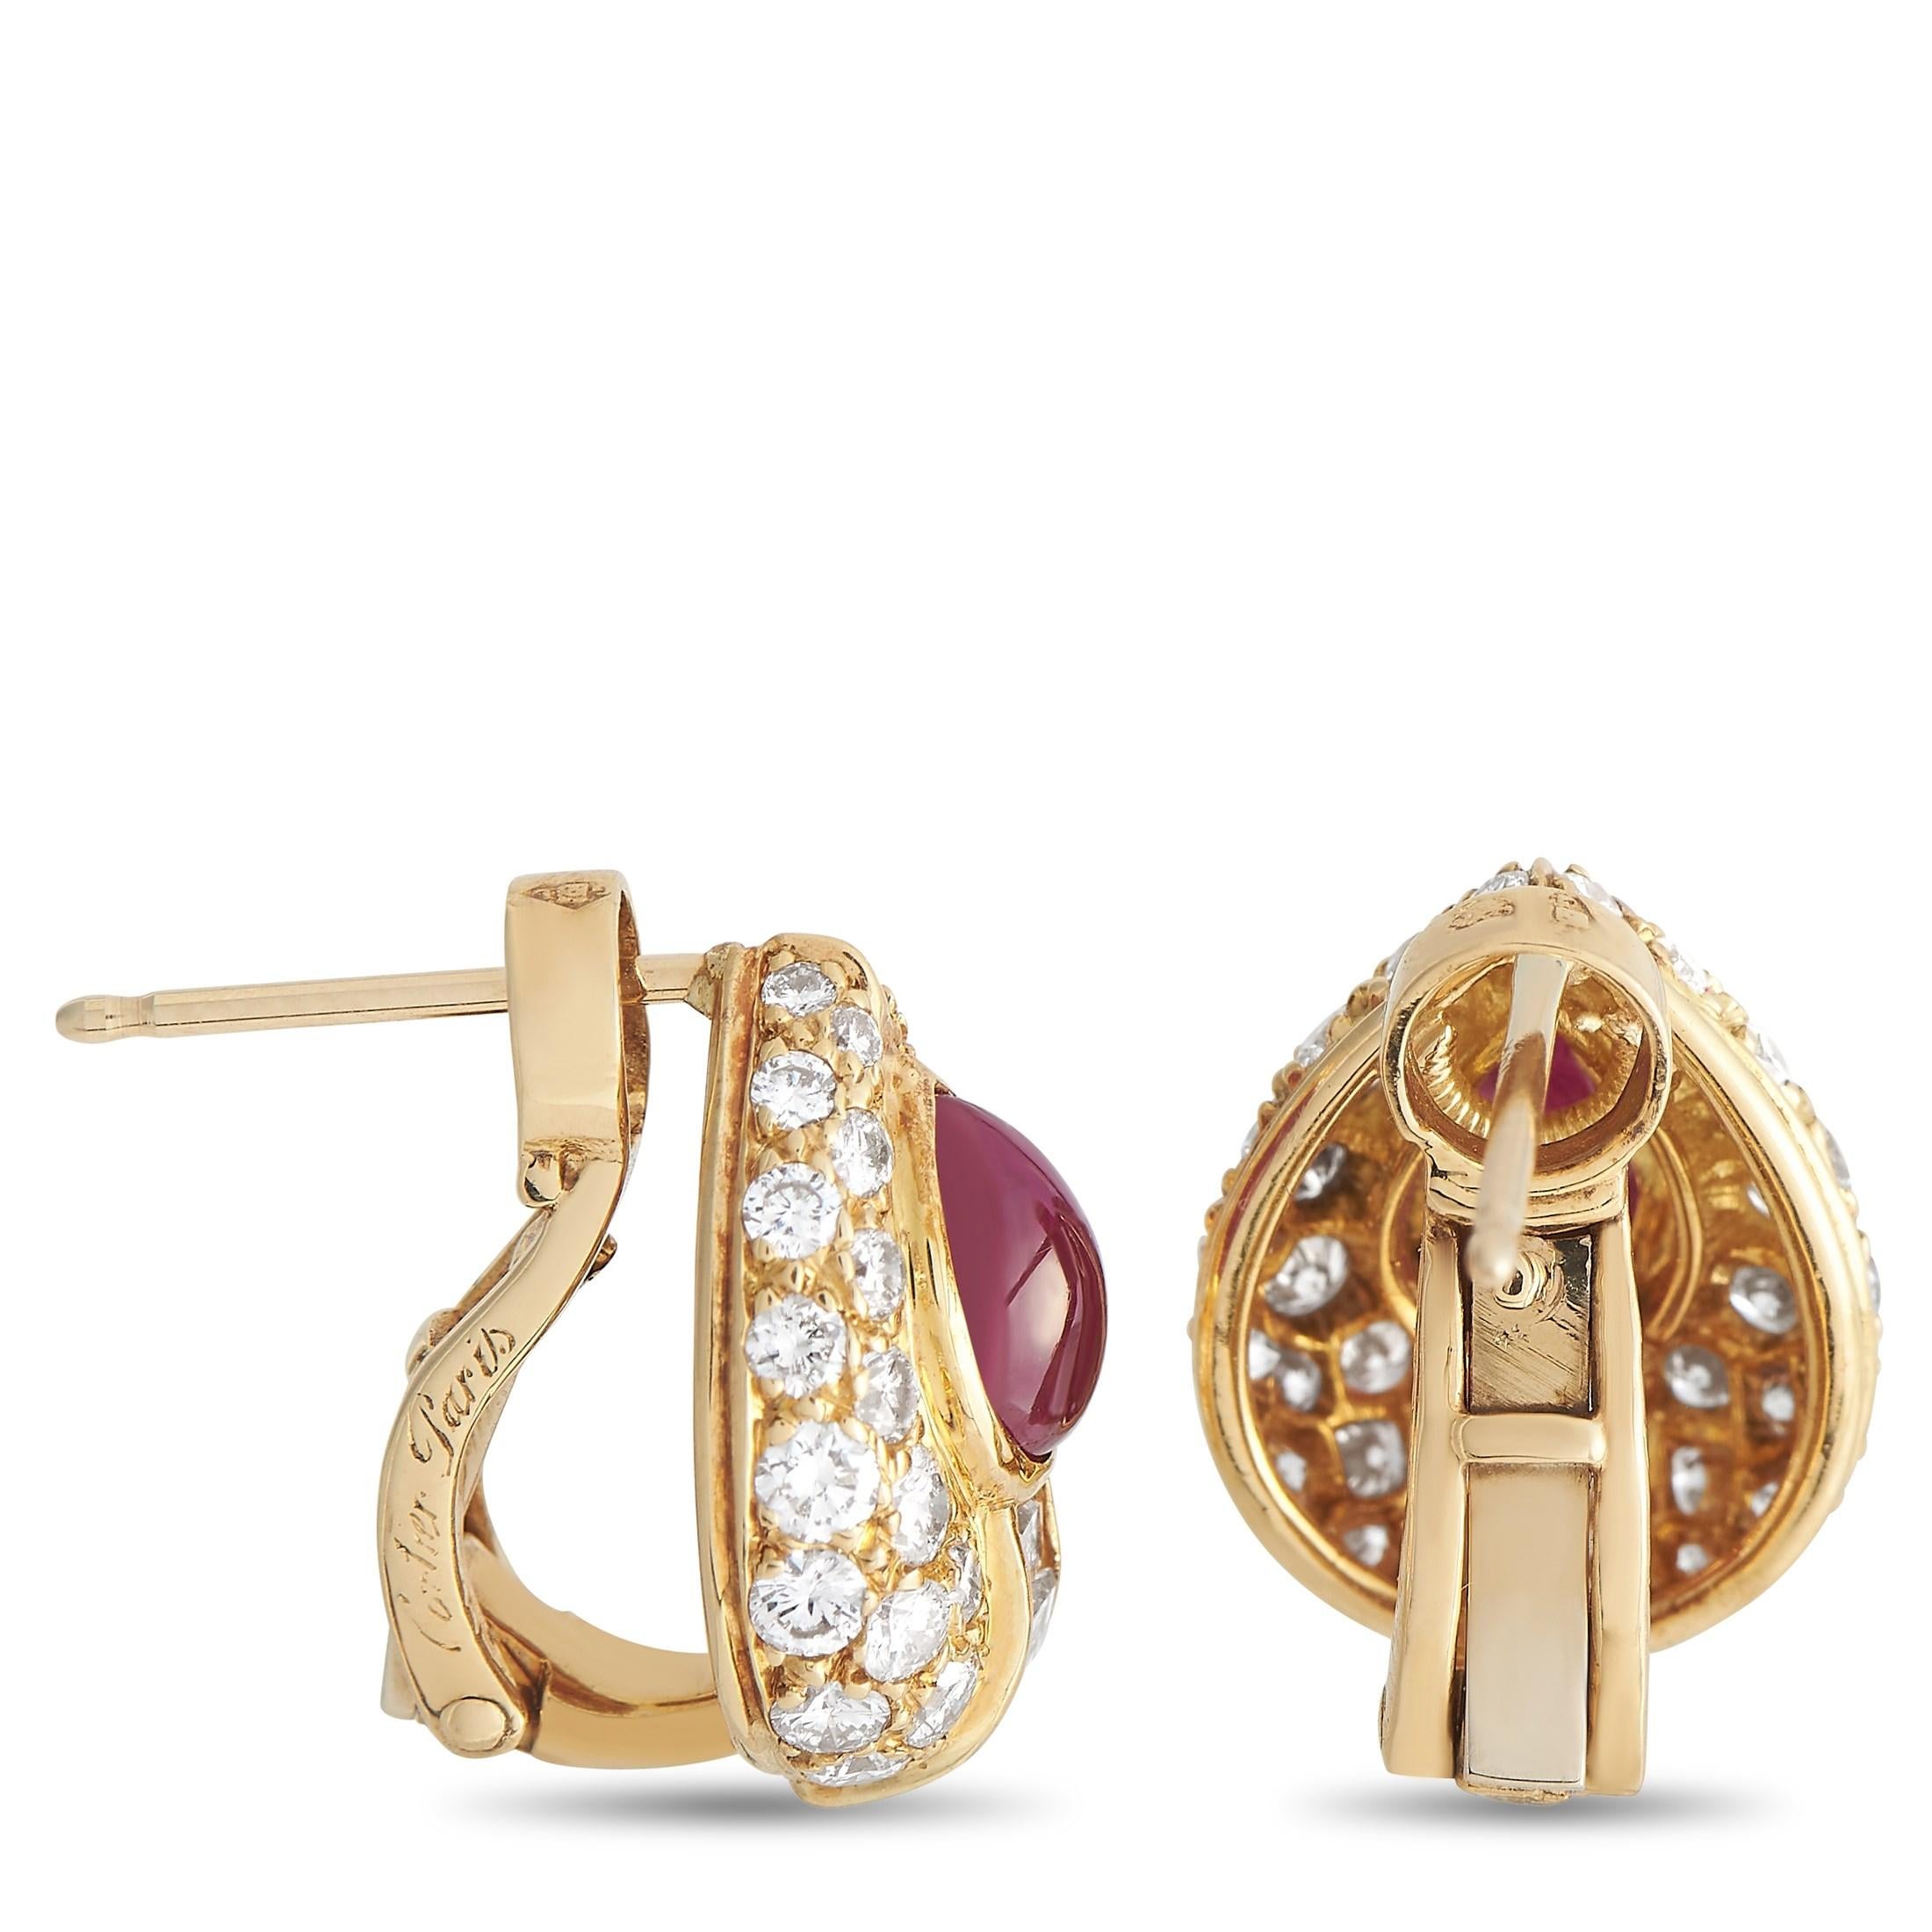 There’s something inherently elegant about these opulent Cartier Earrings. Crafted from 18K Yellow Gold, each one features a stunning array of inset diamond accents that together possess a total weight of 1.25 carats. Pear-shaped rubies totaling